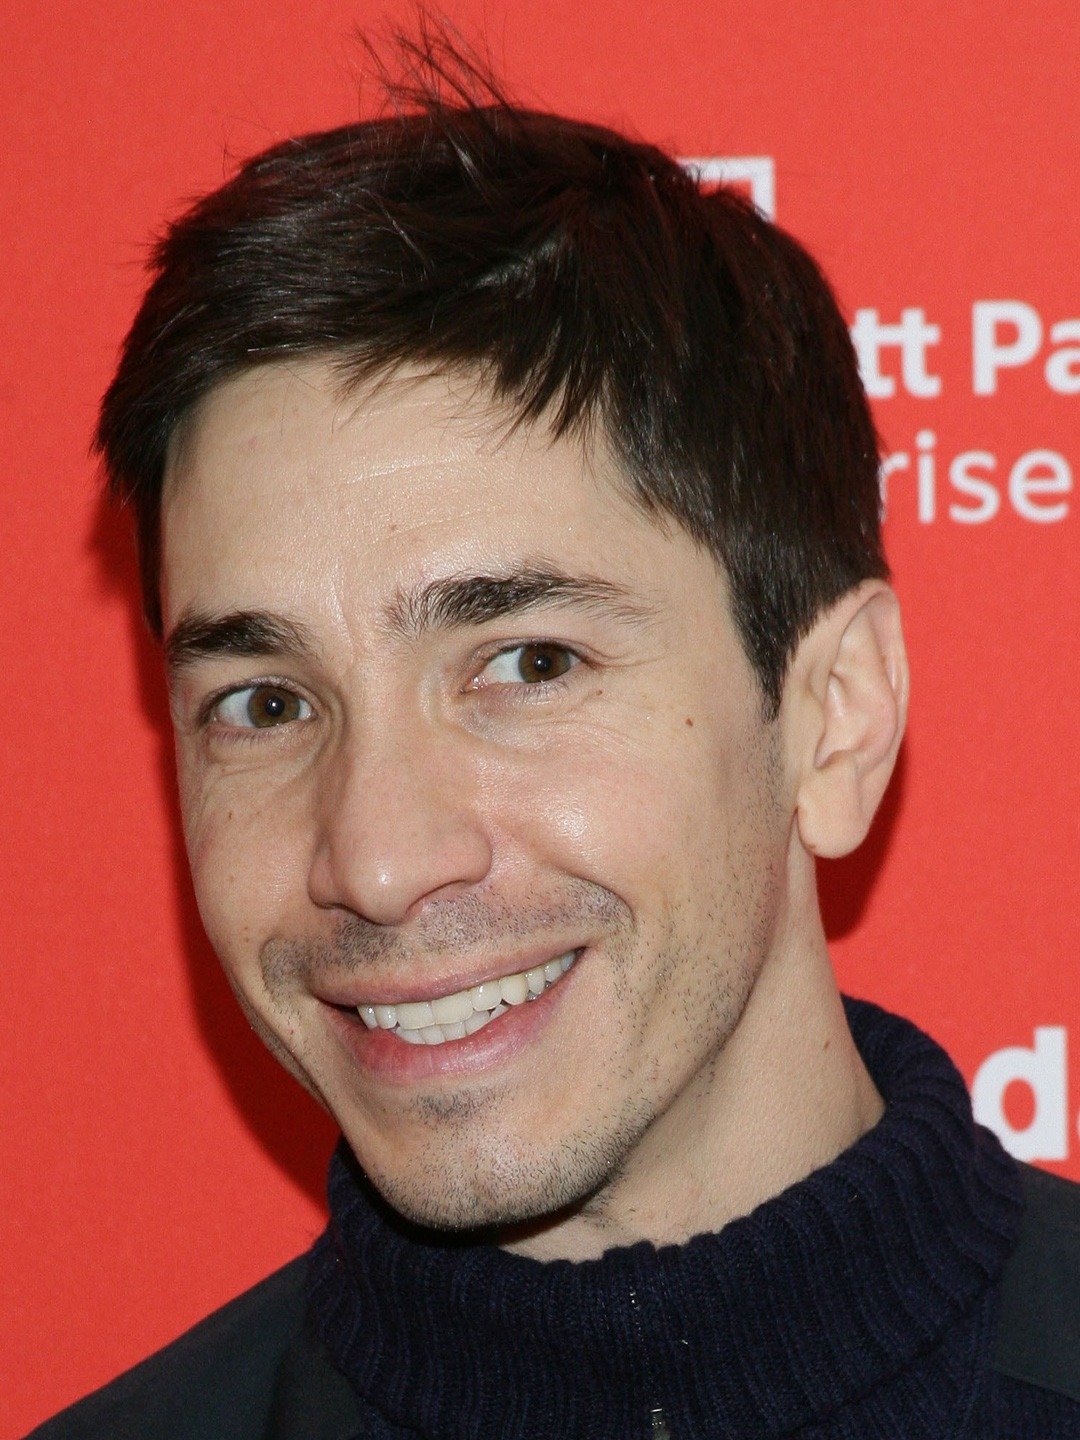 Justin Long Has a Rude Opinion About Selfies